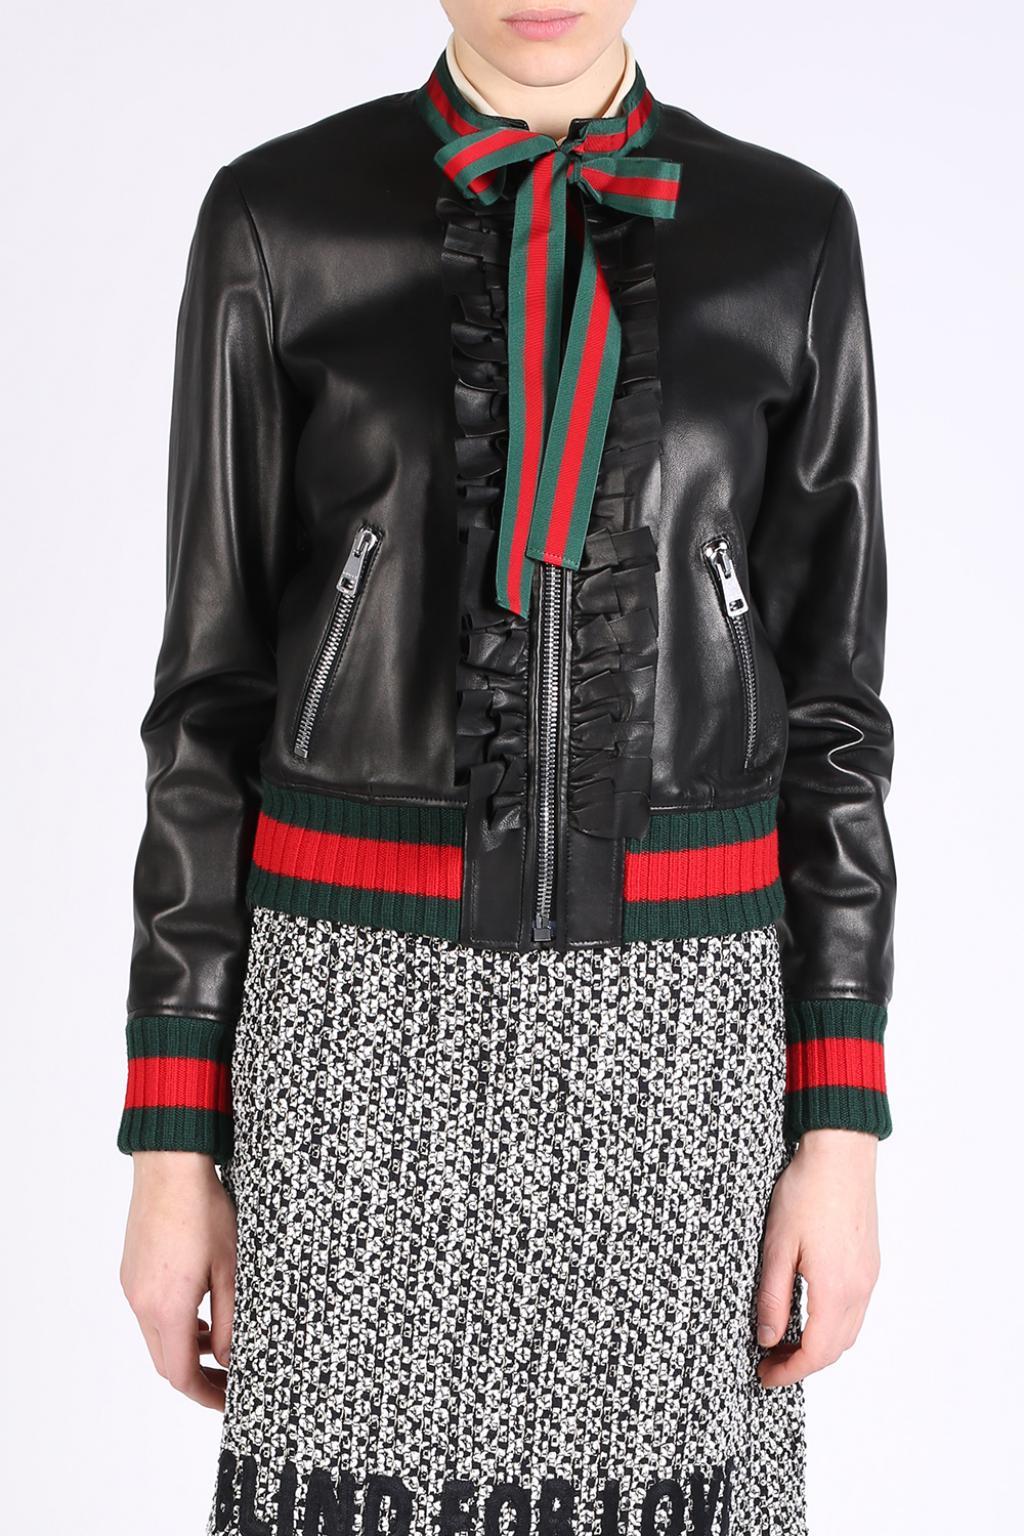 Gucci Ruffle Leather Bomber Jacket in Black